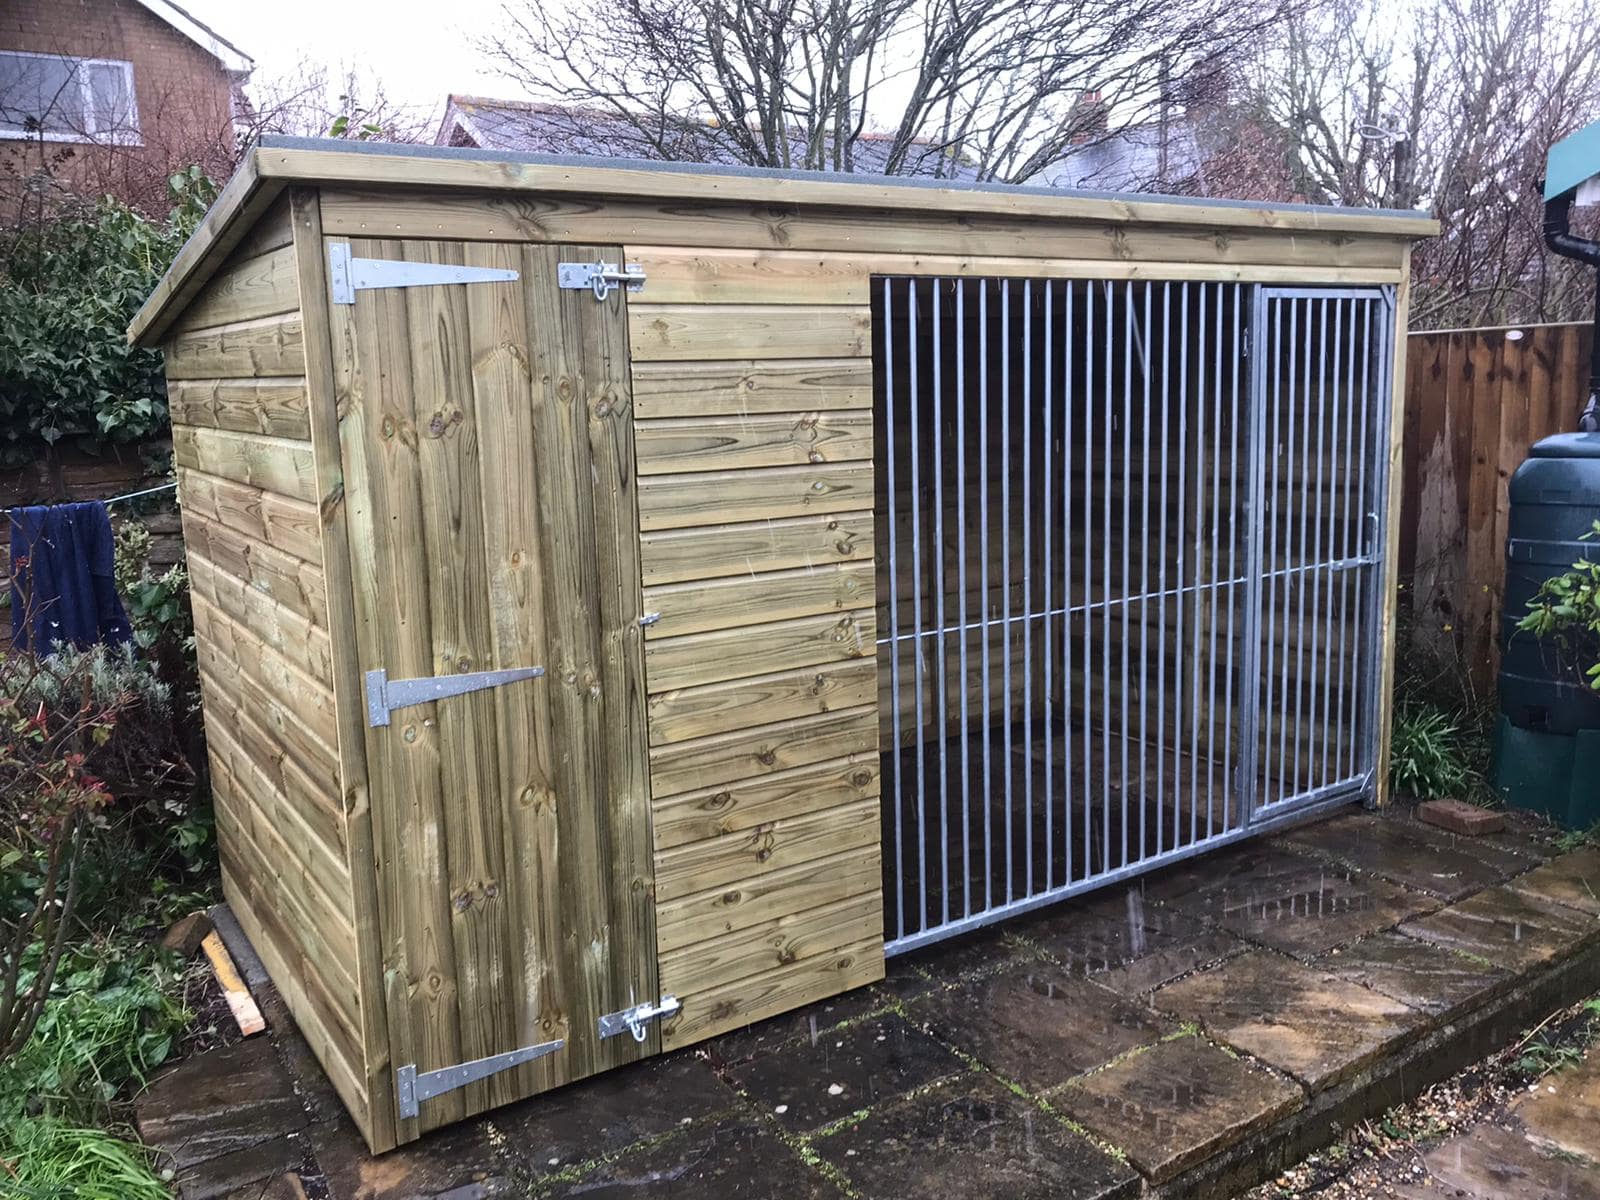 Chesterfield Wooden Dog Kennel And Run 8ft (wide) x 6ft (depth) x 5'11ft (high)